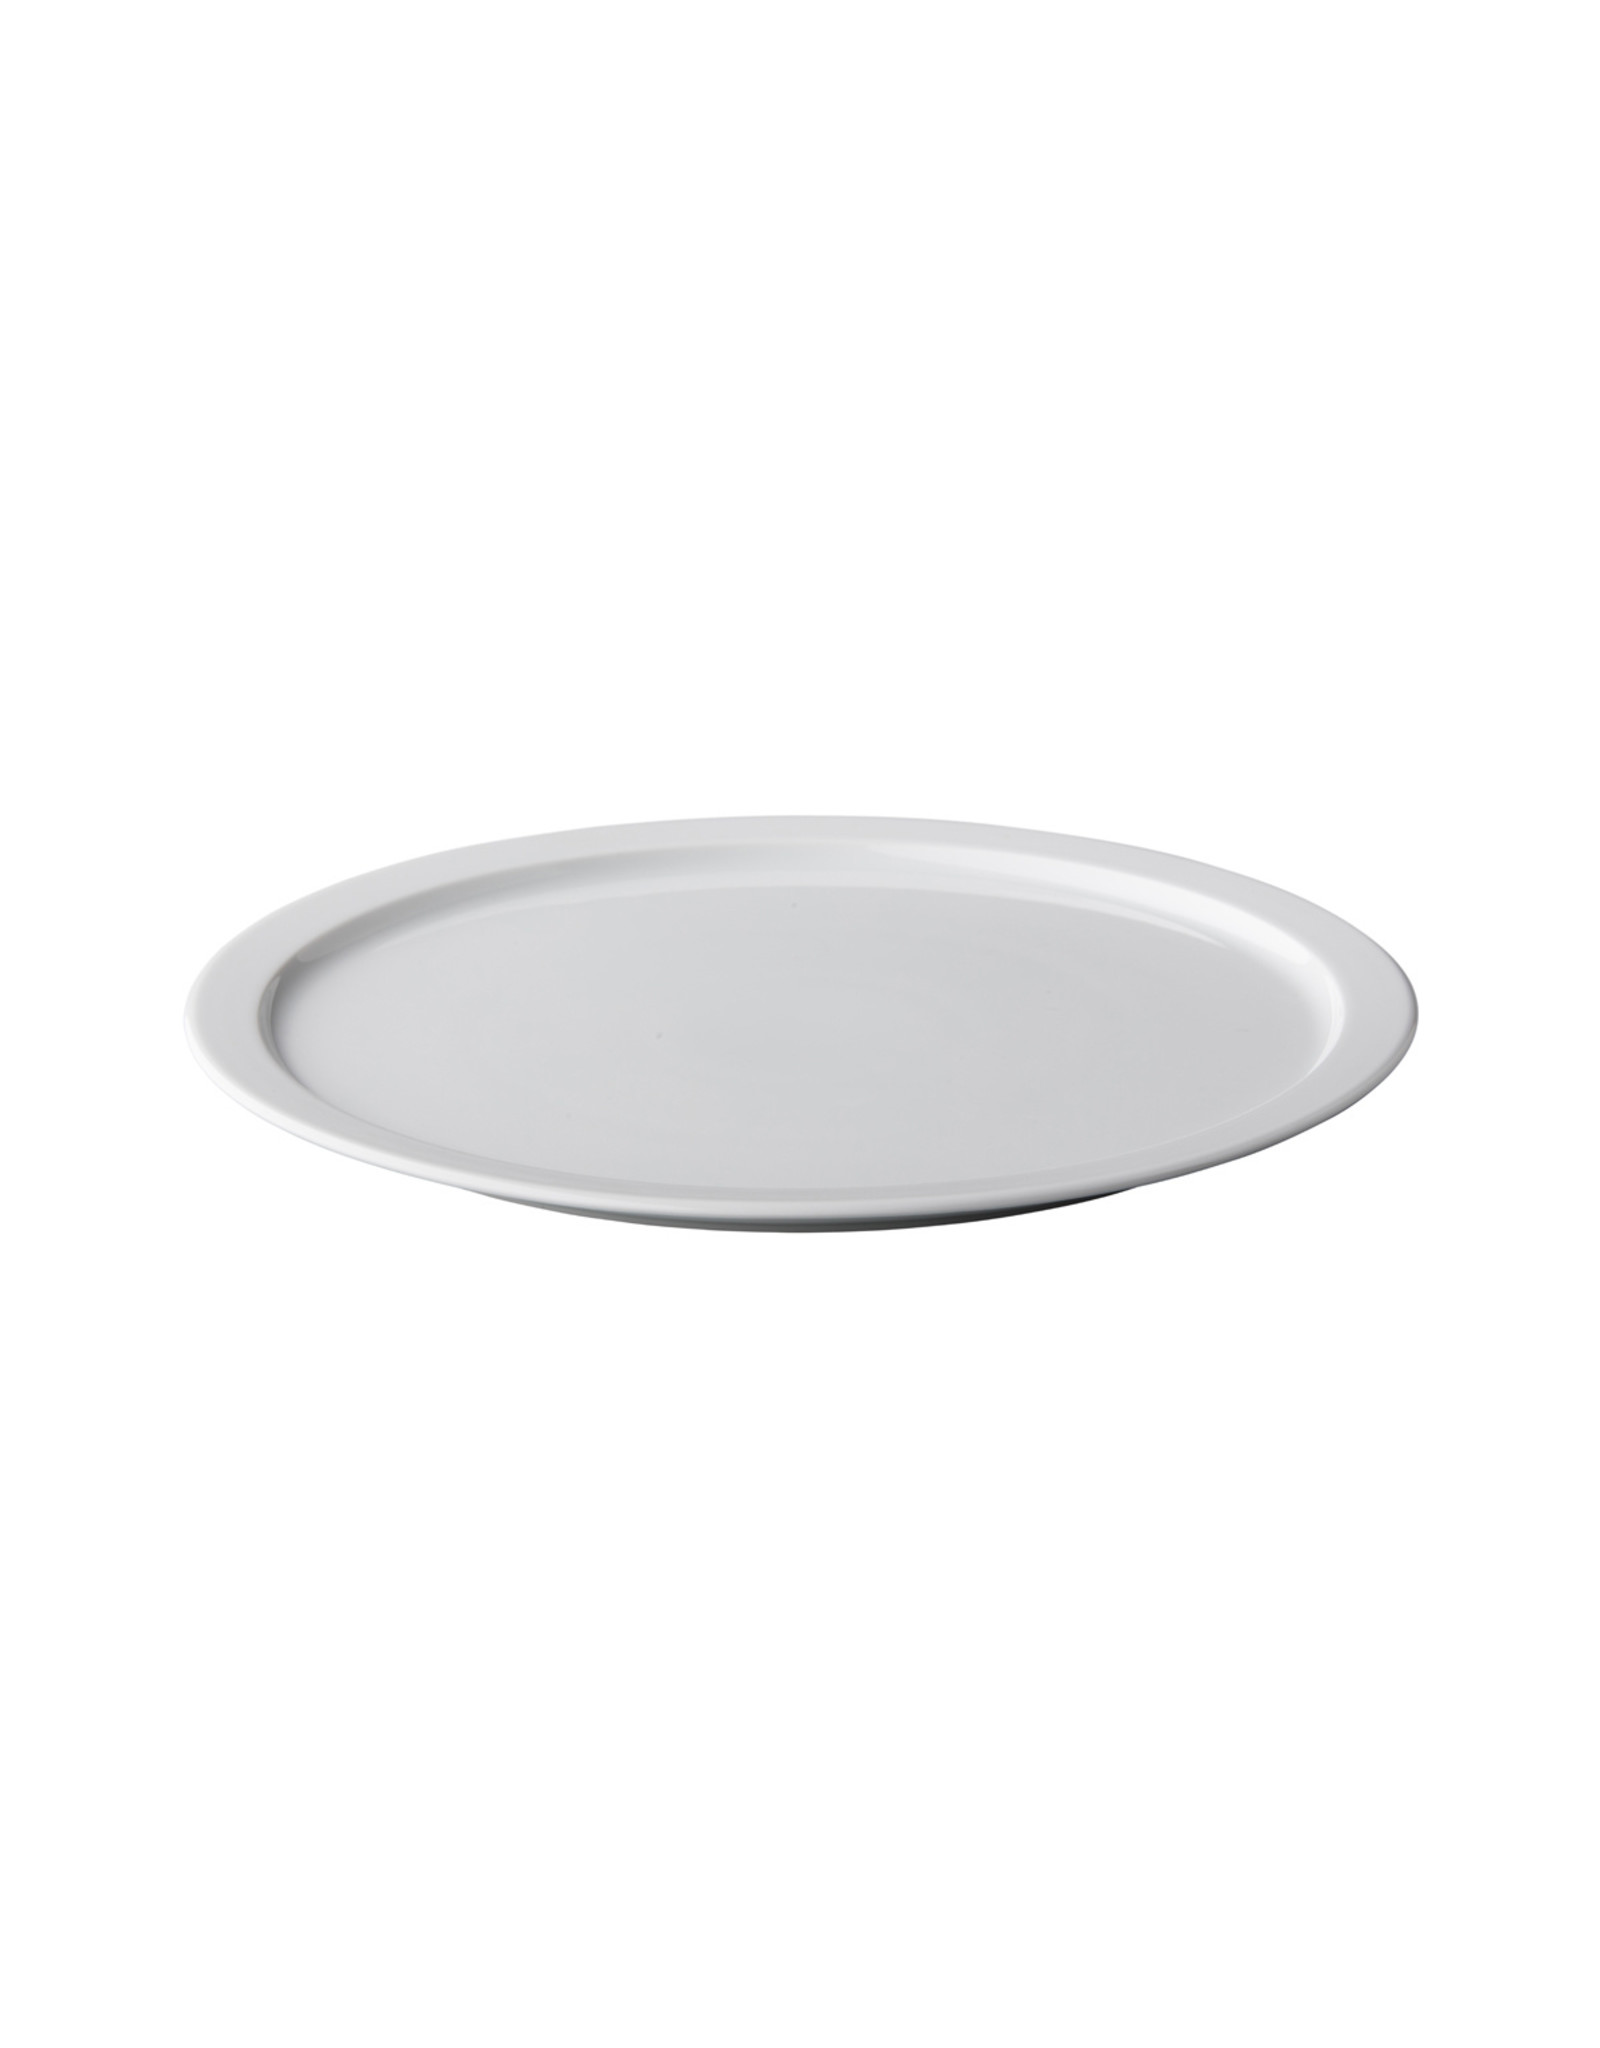 Stylepoint Q Basic Pizza Plate 33cm